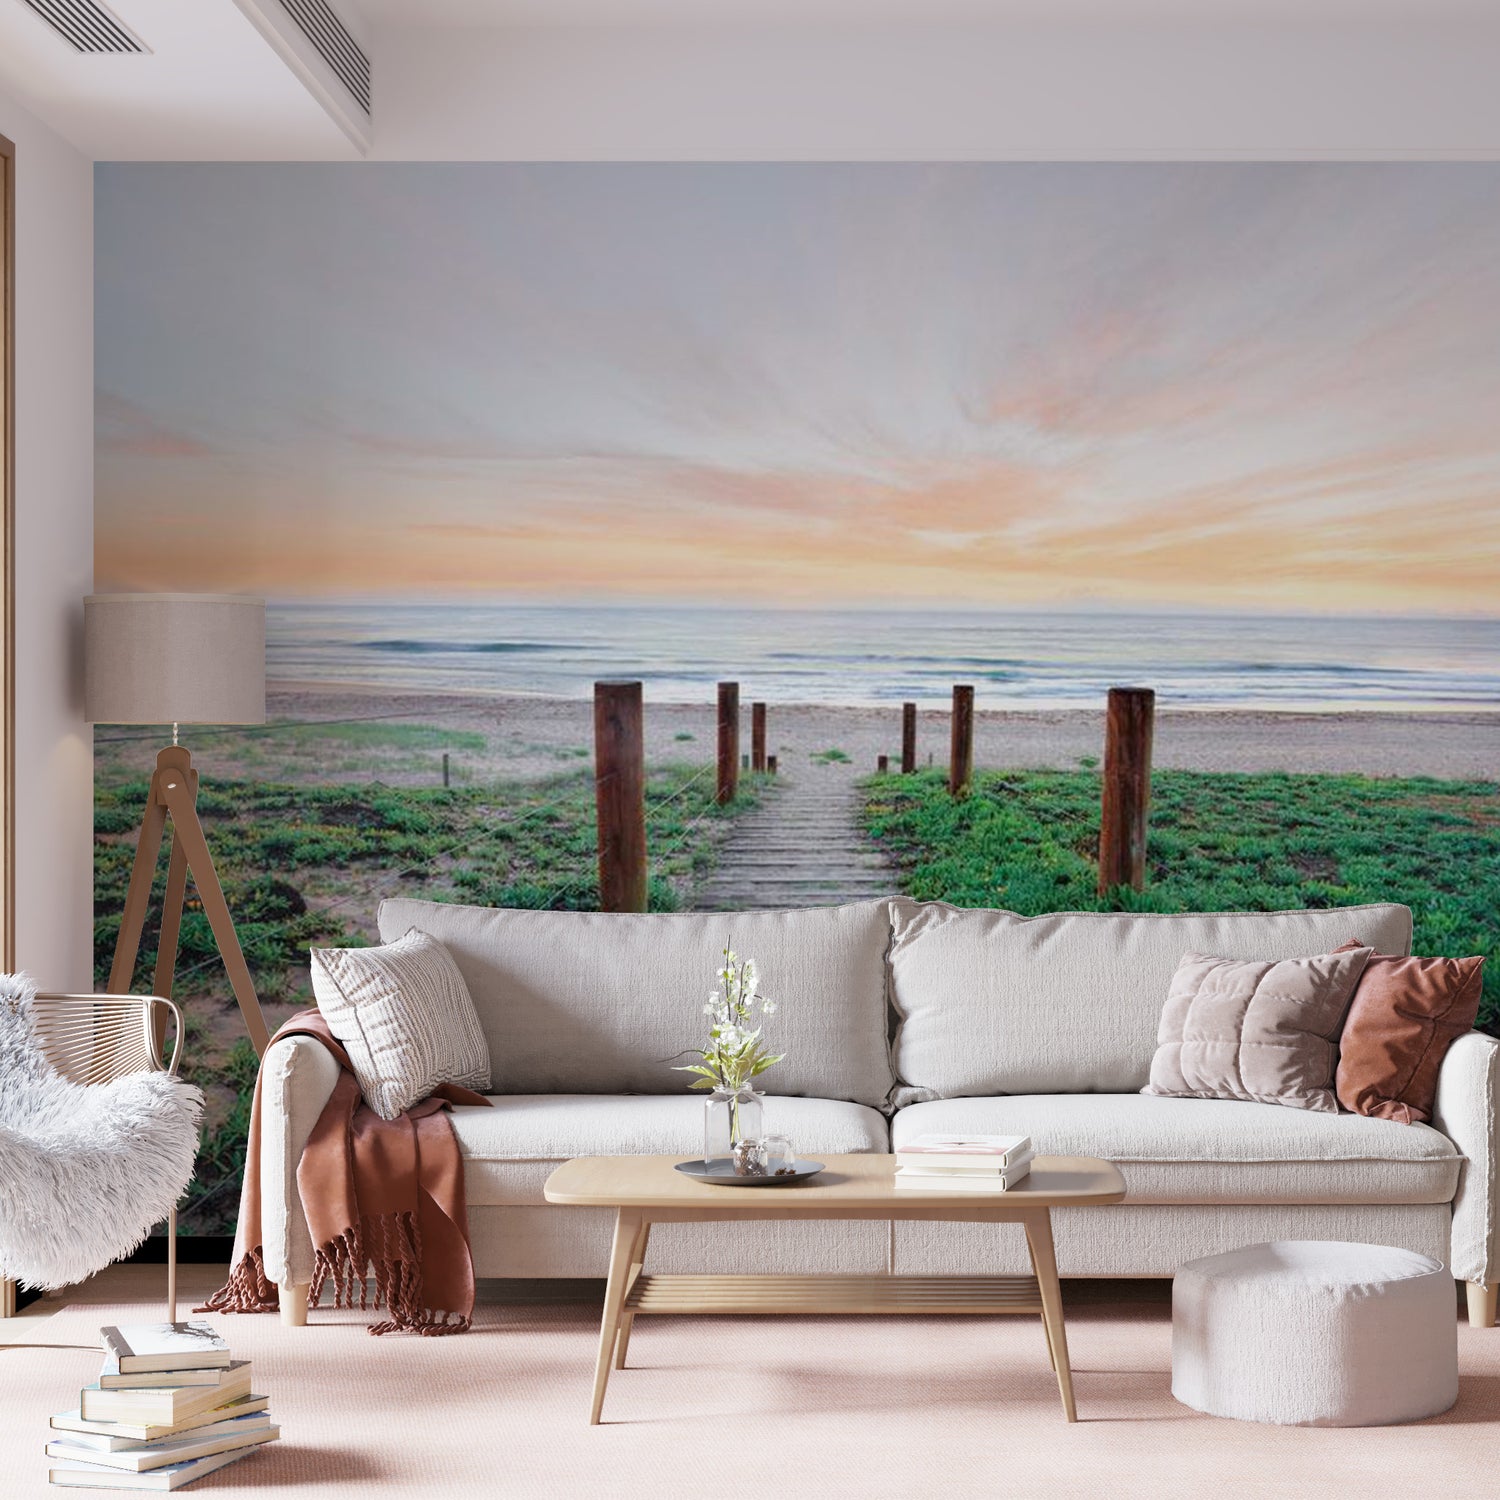 Peel & Stick Beach Wall Mural - Among The Grass - Removable Wall Decals